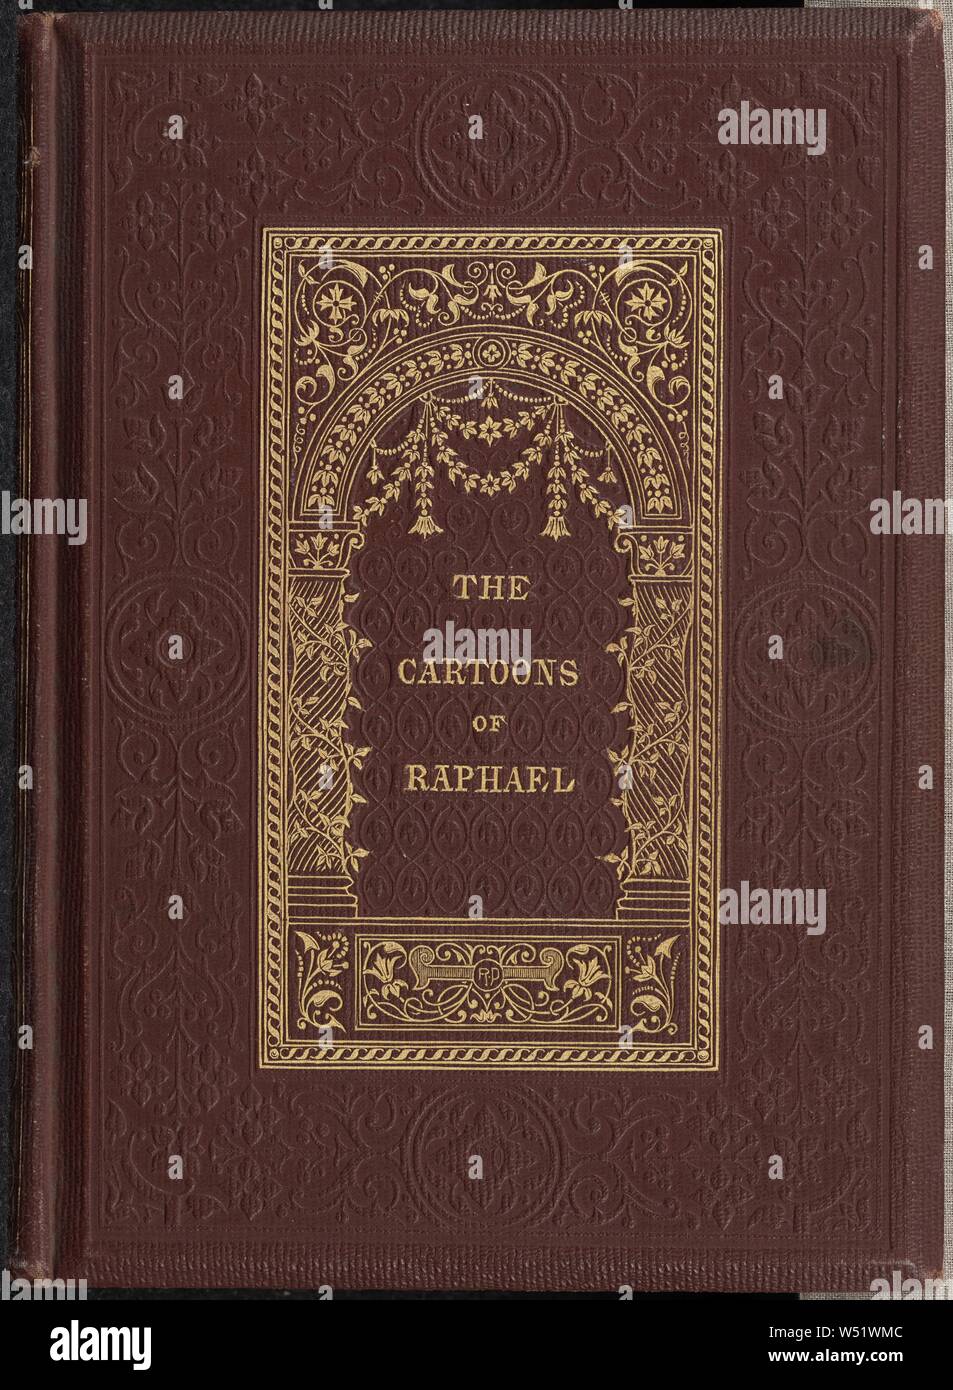 Expositions of the Cartoons of Raphael. Illustrated by Photographs, Printed by Negretti and Zambra., Negretti & Zambra (British, active 1850 - 1899), Richard Henry Smith, Jr., London, England, 1860, Albumen silver print, Closed: 21.3 × 15.3 × 1.8 cm (8 3/8 × 6 × 11/16 in Stock Photo